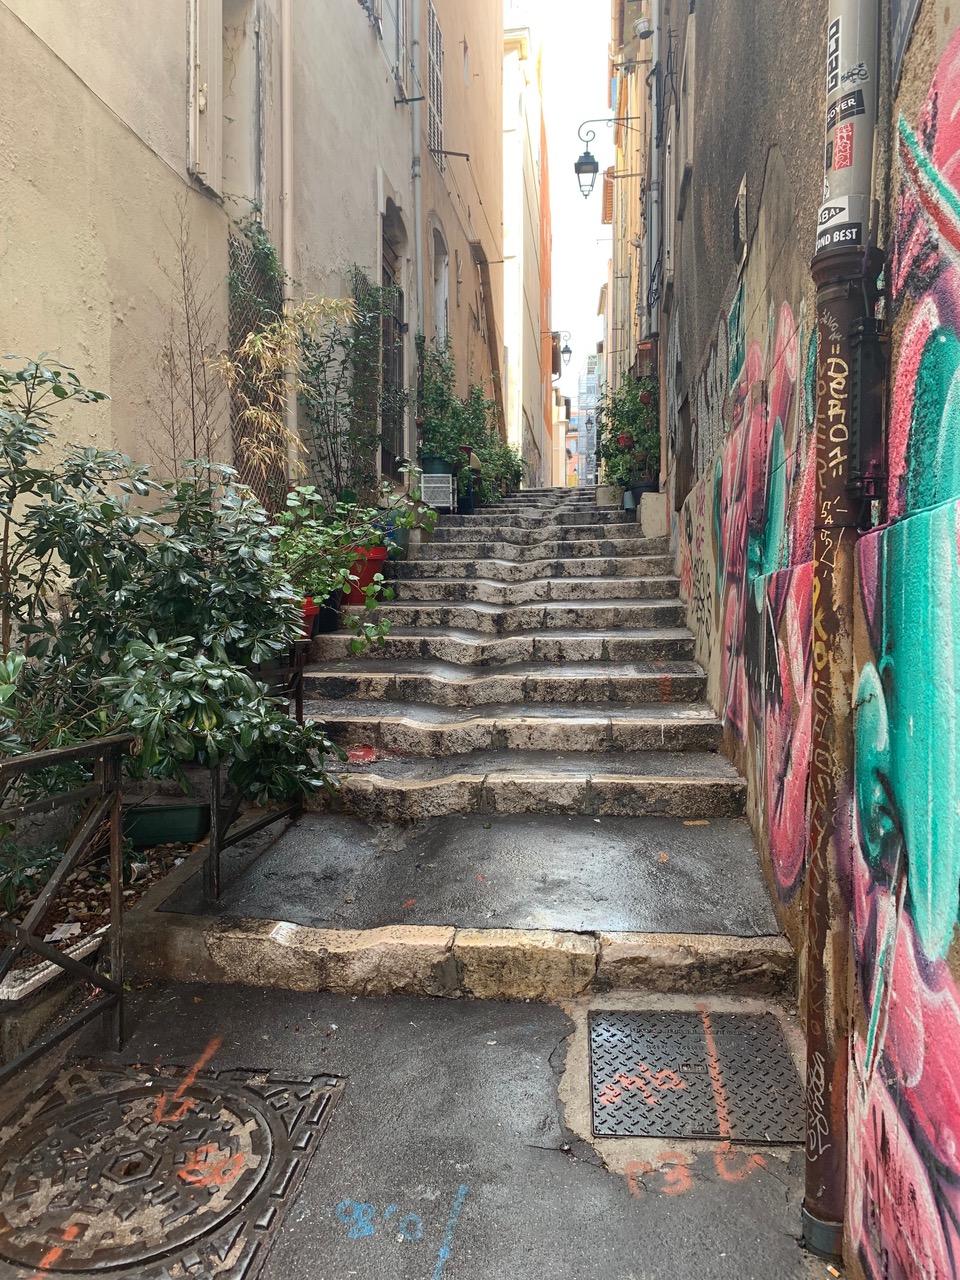 A narrow street with steps rising painted with street art on one side and rows of potted plants on the other